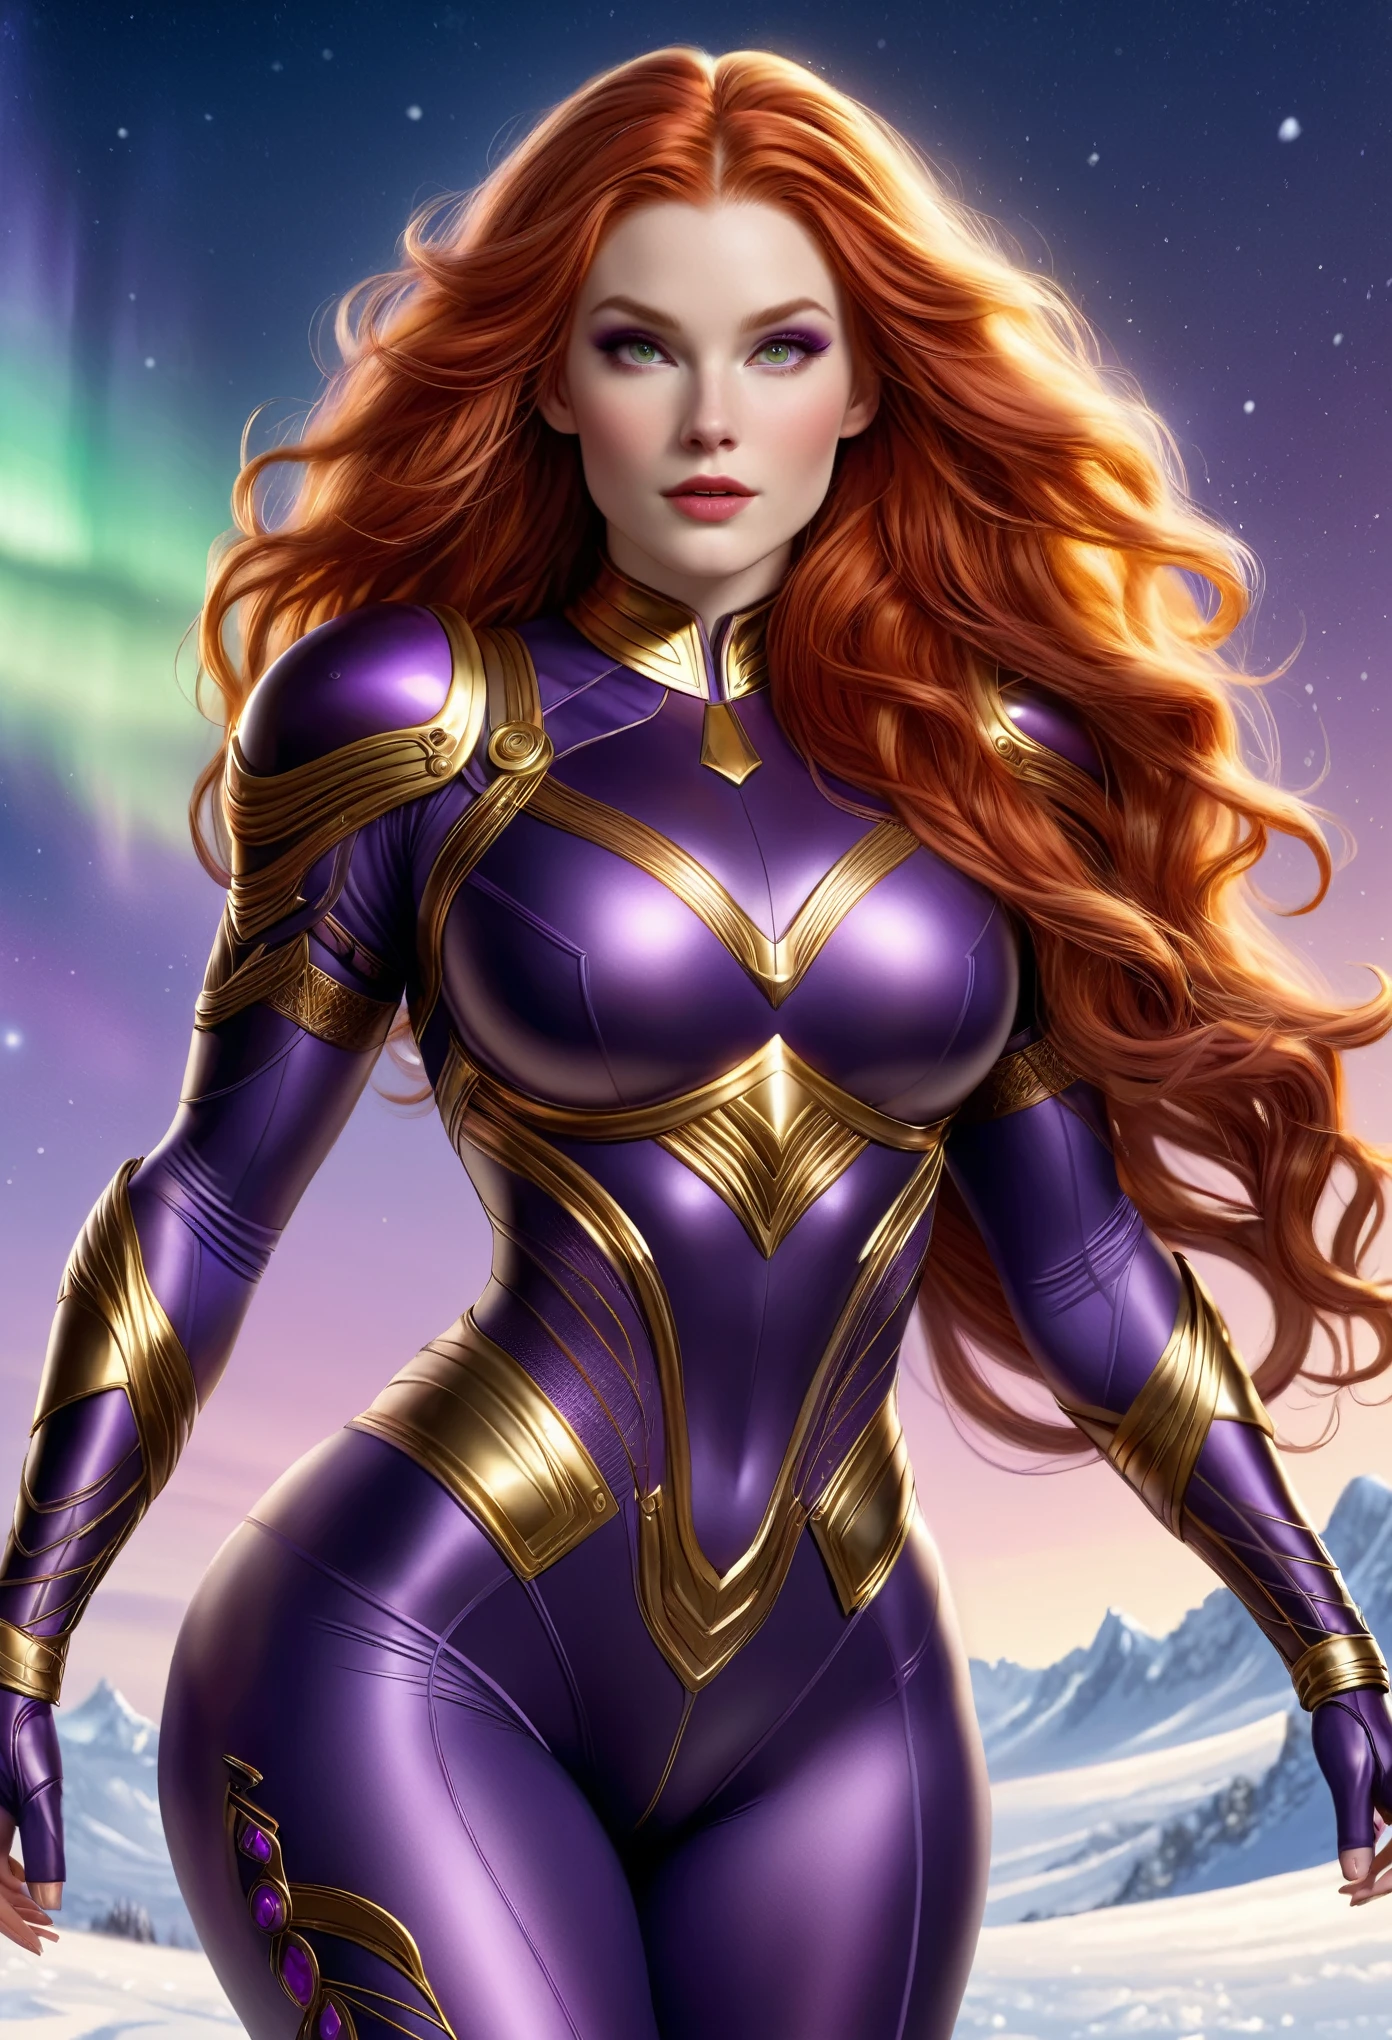 BOMBSHELL RED HAIR VALKYRIE, PALE SKIN, LIGHT BROWN EYES, HIGH CHEEKBONES, ROSY CHEEKS, MENTAL FORAMEN, HUGE LONG HAIR, DOUBLE BRAID HAIR, LEOTARD ARMOUR, LONG SLEEVES, GOLD ARMOUR, PURPLE UNDER BODYSUIT, NECK BODYSUIT, GOLD GAUNTLETS, ATHLETIC CURVY BODY, DETAILED QUADRICEPS, MUSCLES, SIDE BODY VIEW, NORTHERN LIGHTS, NORTH POLE, SNOW, NIGHT SKY, ACCURATE IMAGE, MASTERPIECE.